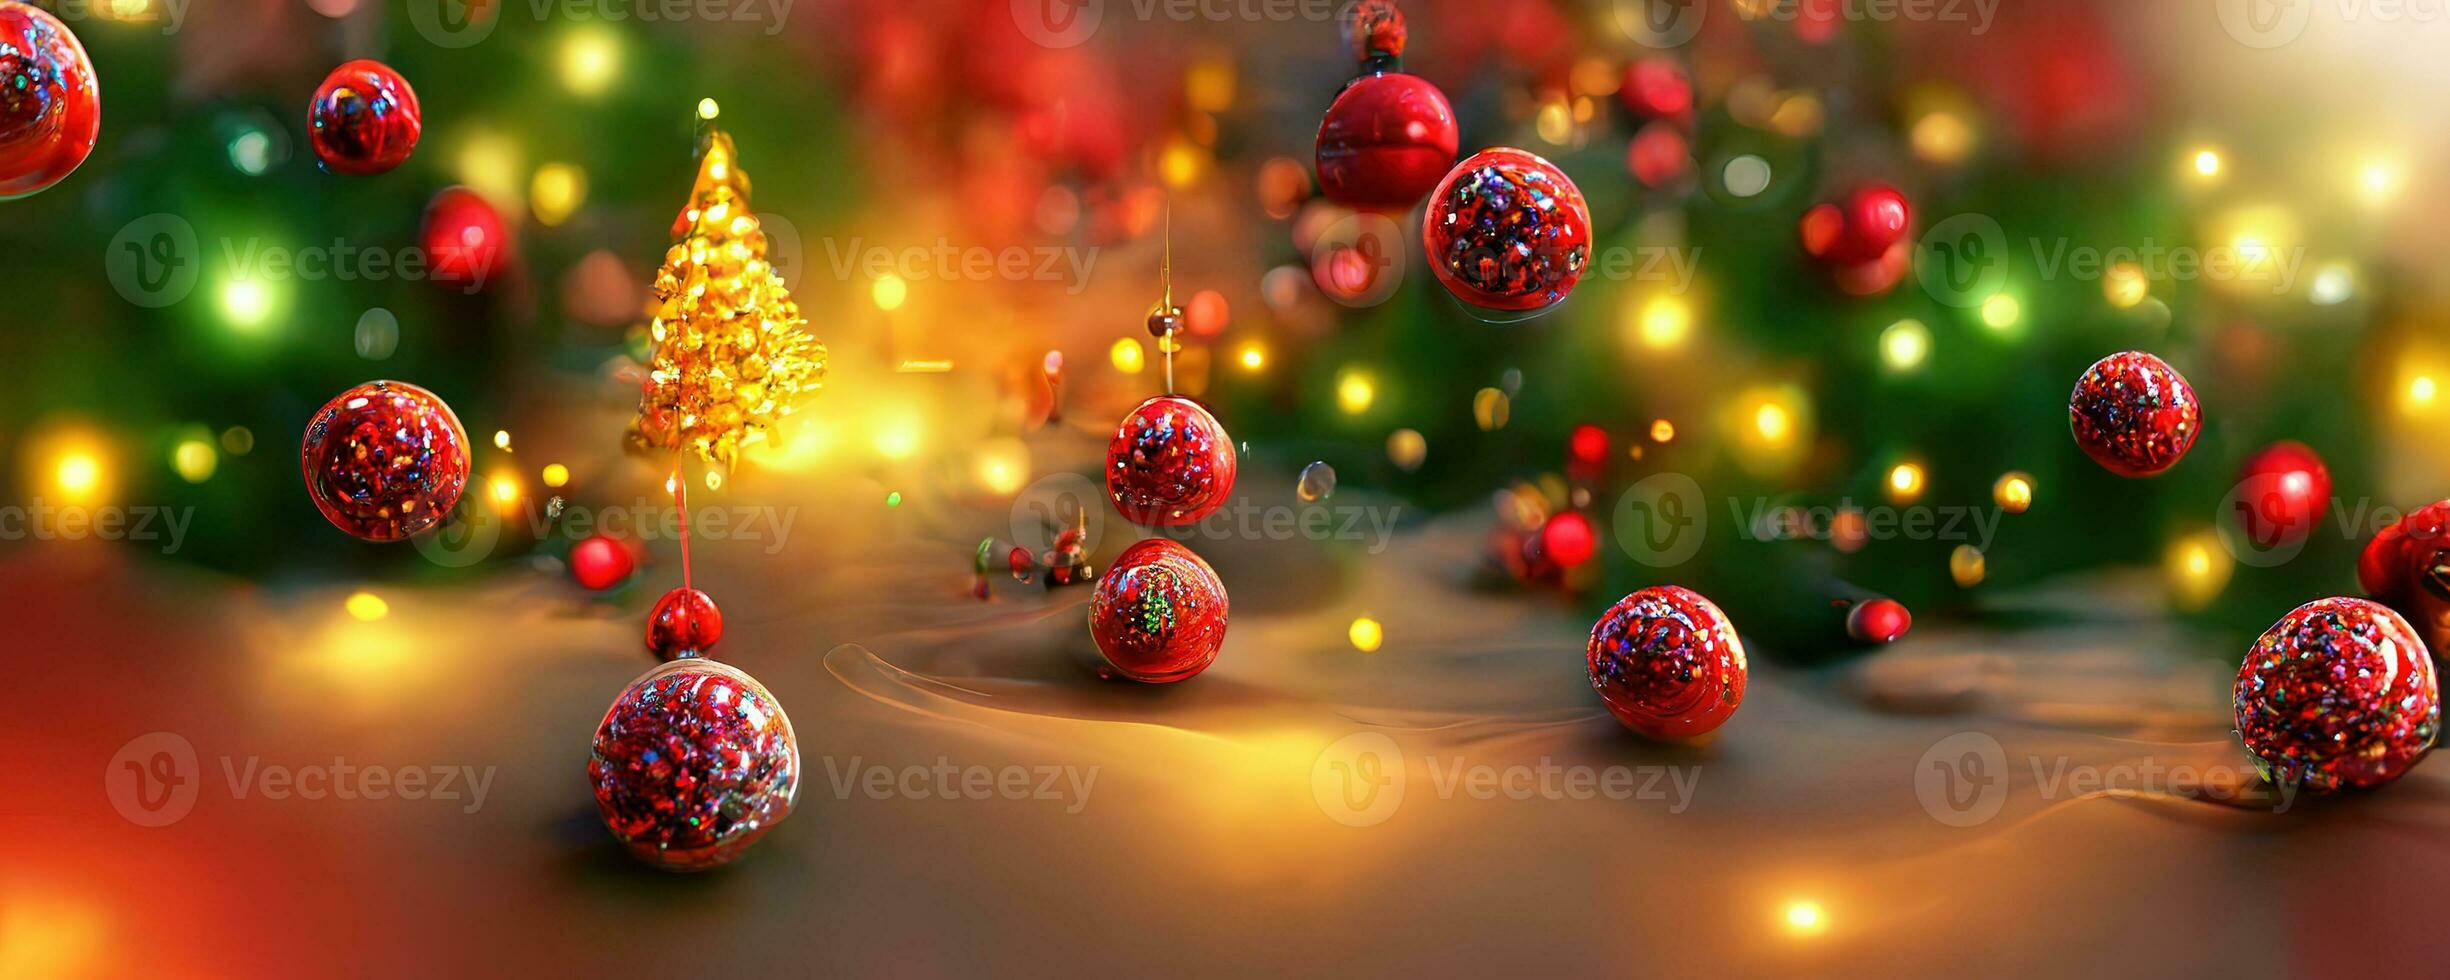 Christmas new year background, dynamic vibrant holidays concept Xmas with copy space 3d rendering. Merry christmas and happy new year celebration photo